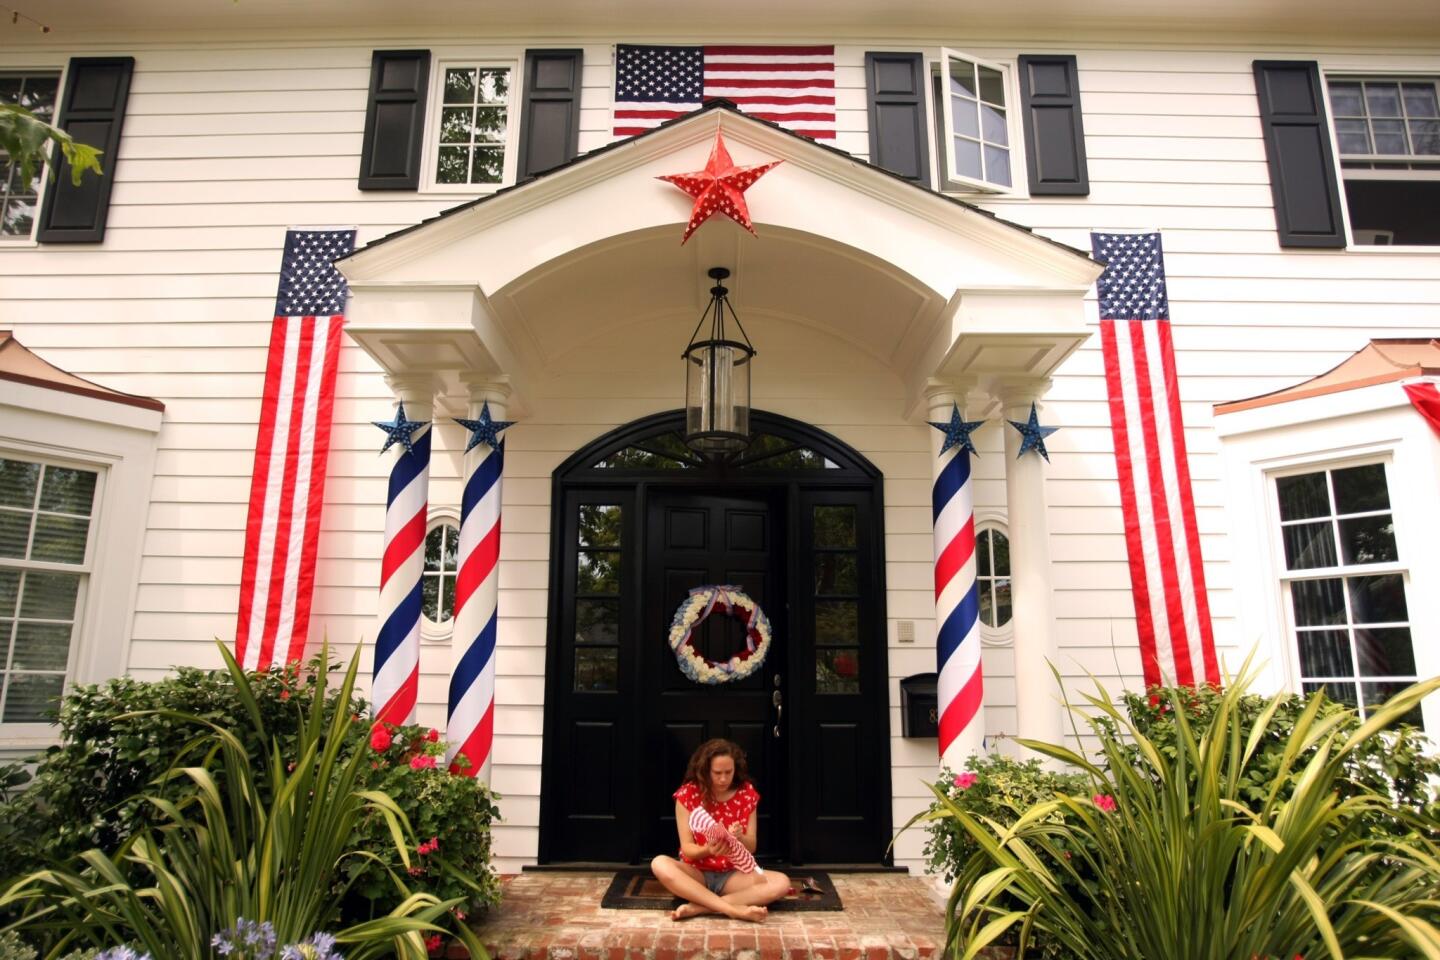 Molly Mercer, 21, works on Fourth of July decorations in front of her home. The house was awarded first place in Pacific Palisades' hotly contested home decorating competition this year.